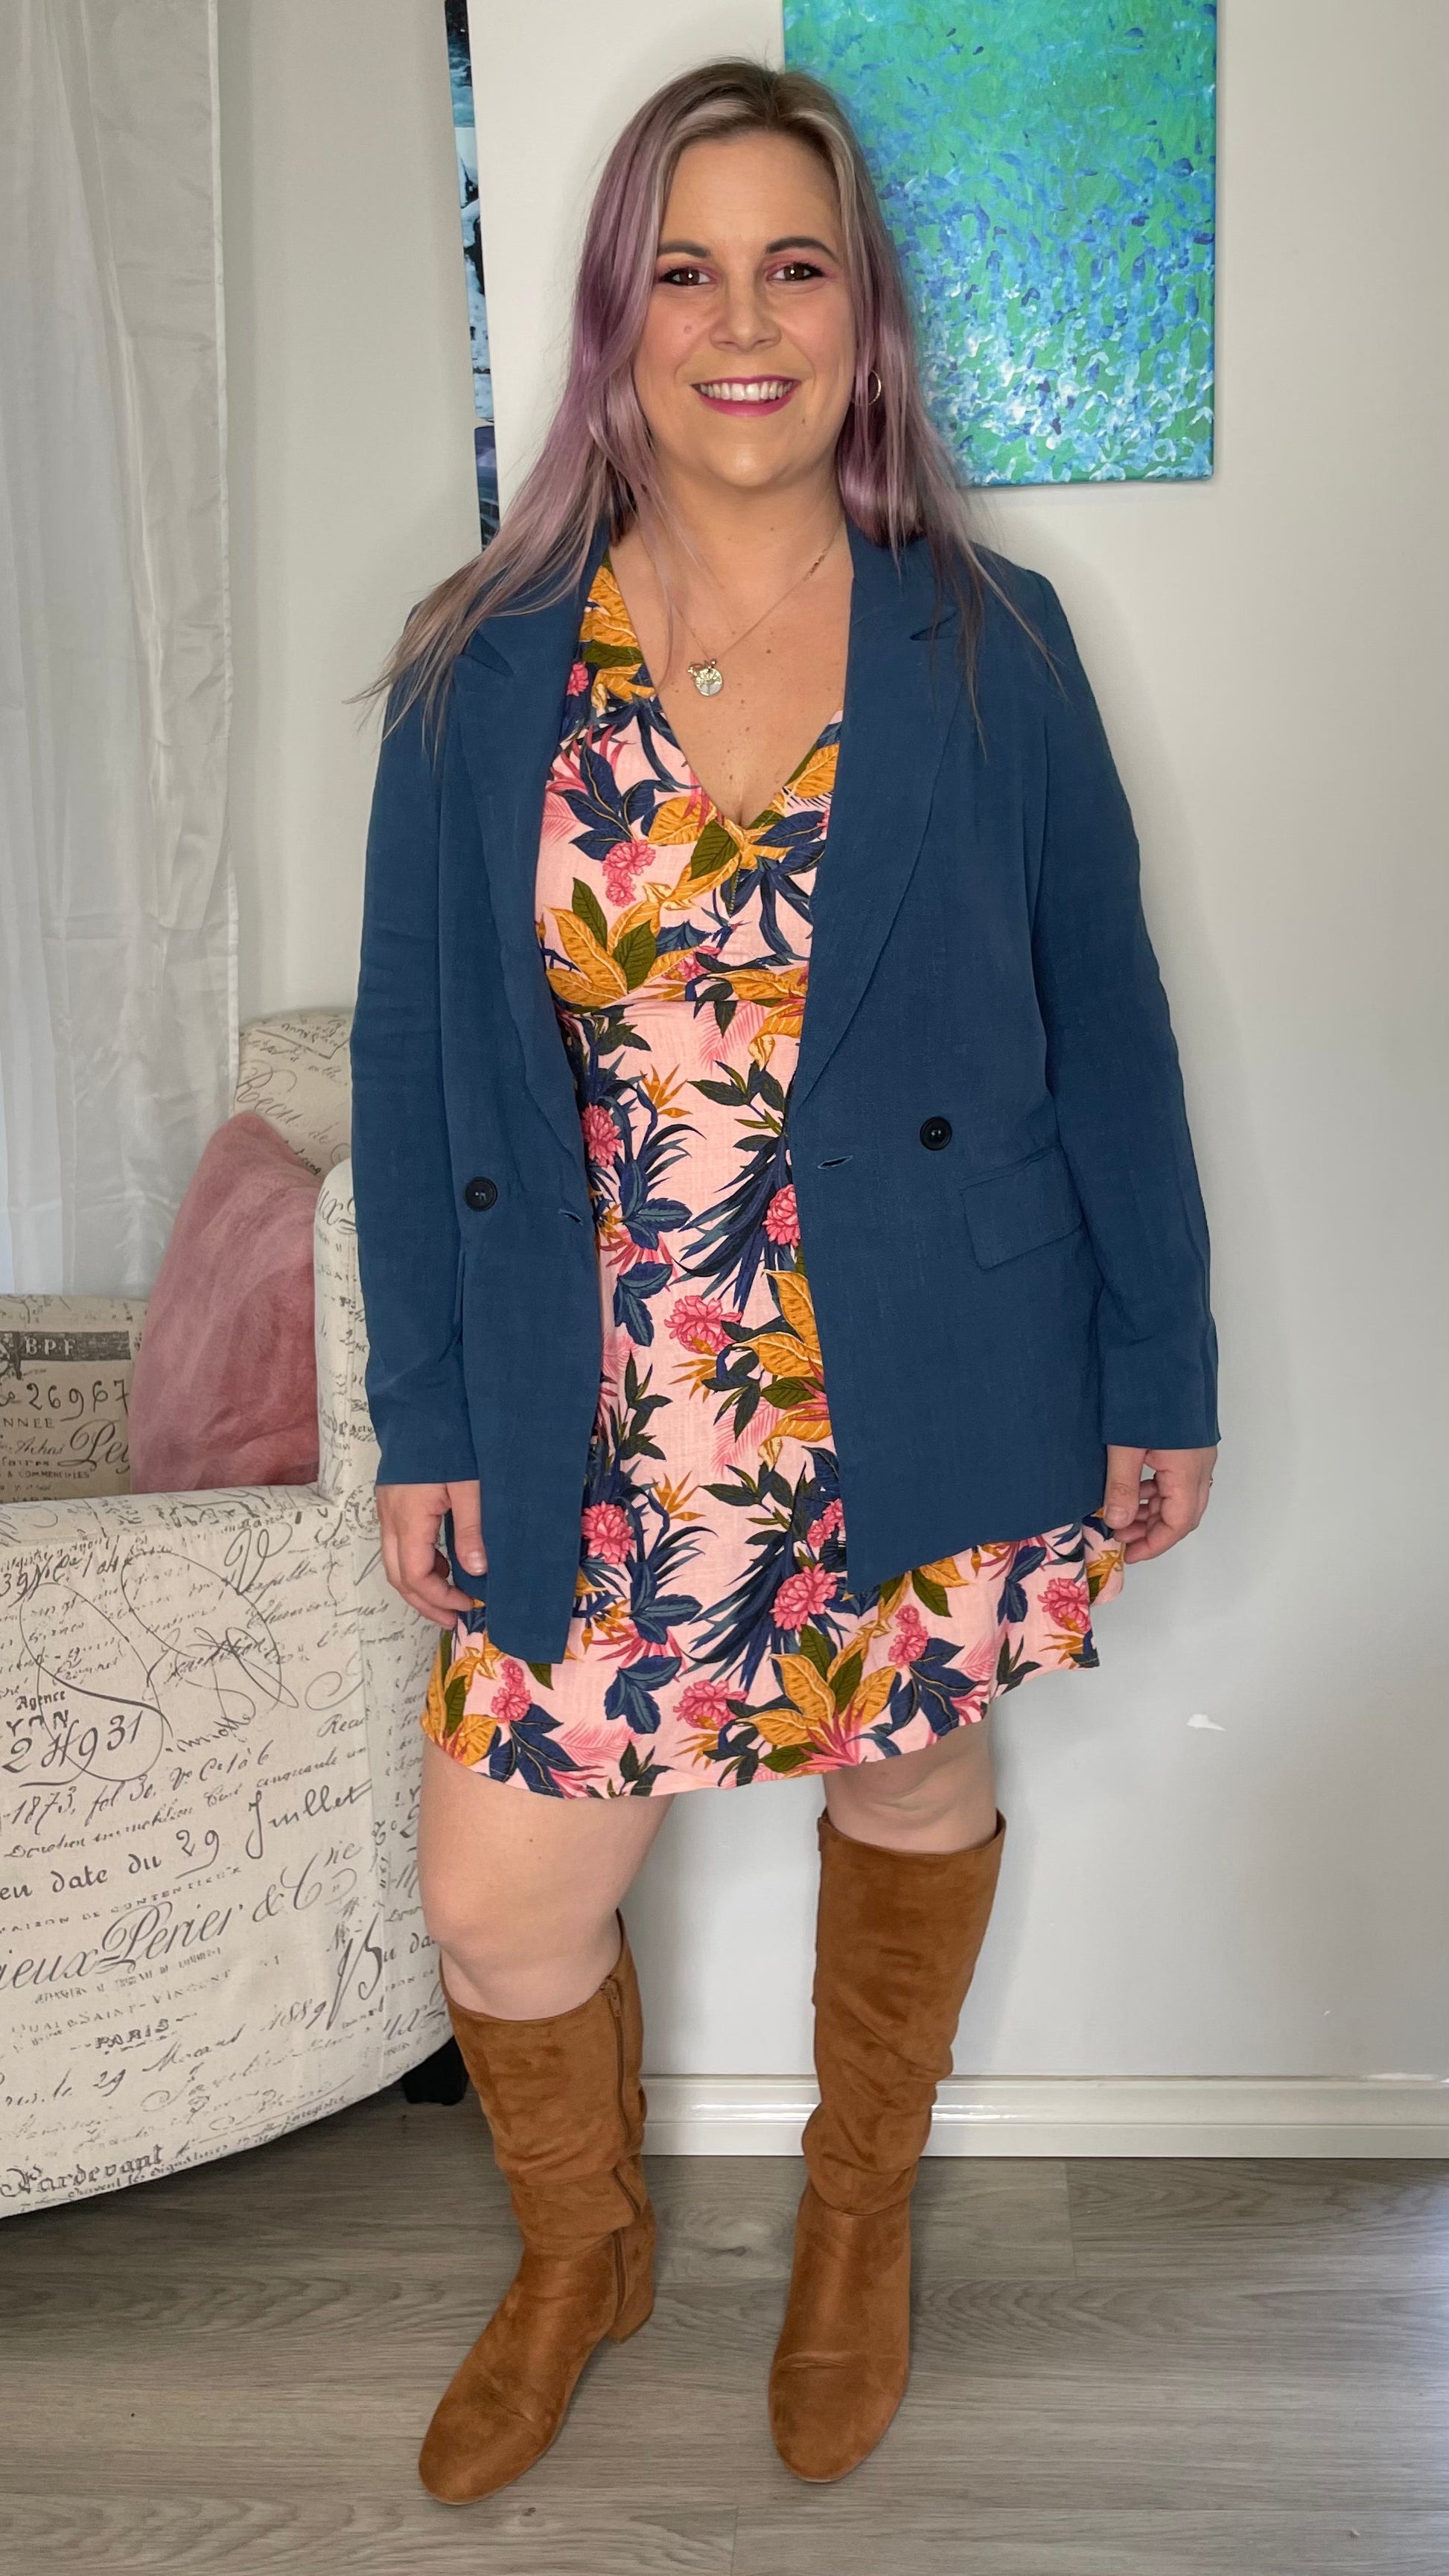 Alexis Blazer - Multi Floral | Sass Clothing | The Alexis Blazer is the fun yet classic blazer you need in your wardrobe! From meetings to margaritas this blazer has all your style needs covered in one!

Relaxed 